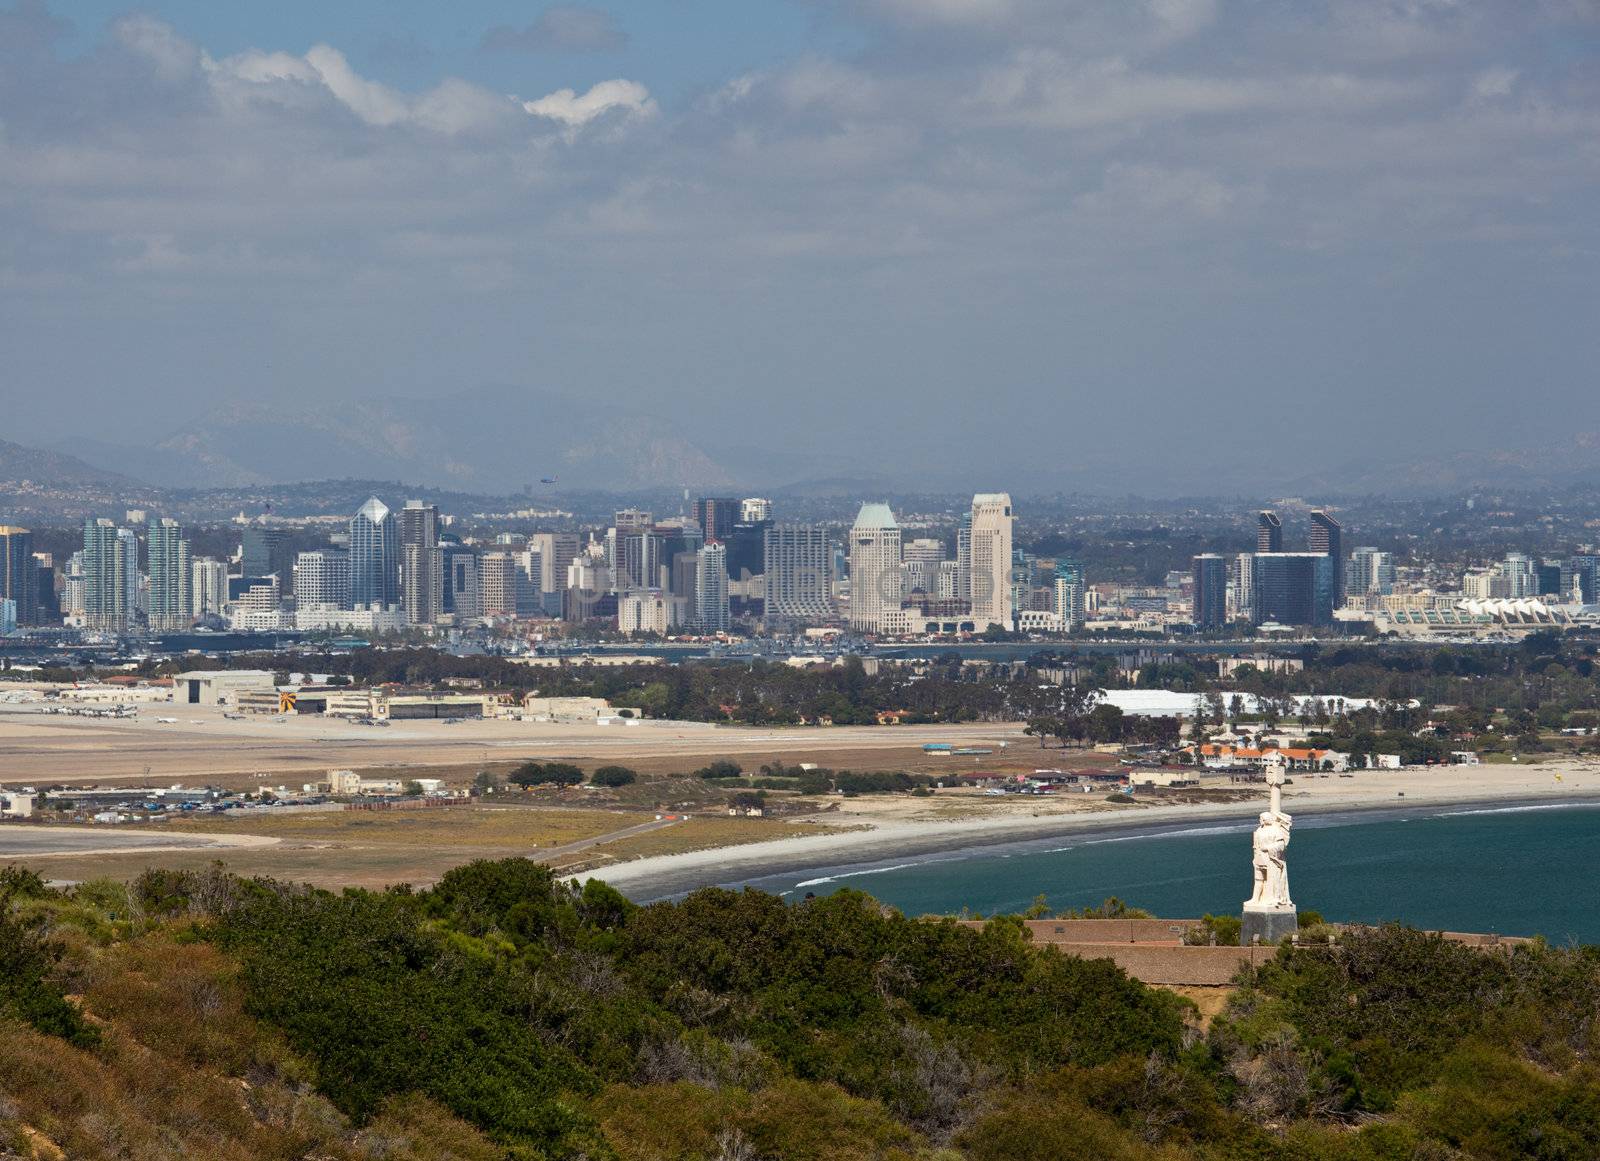 Cabrillo monument and San Diego by steheap